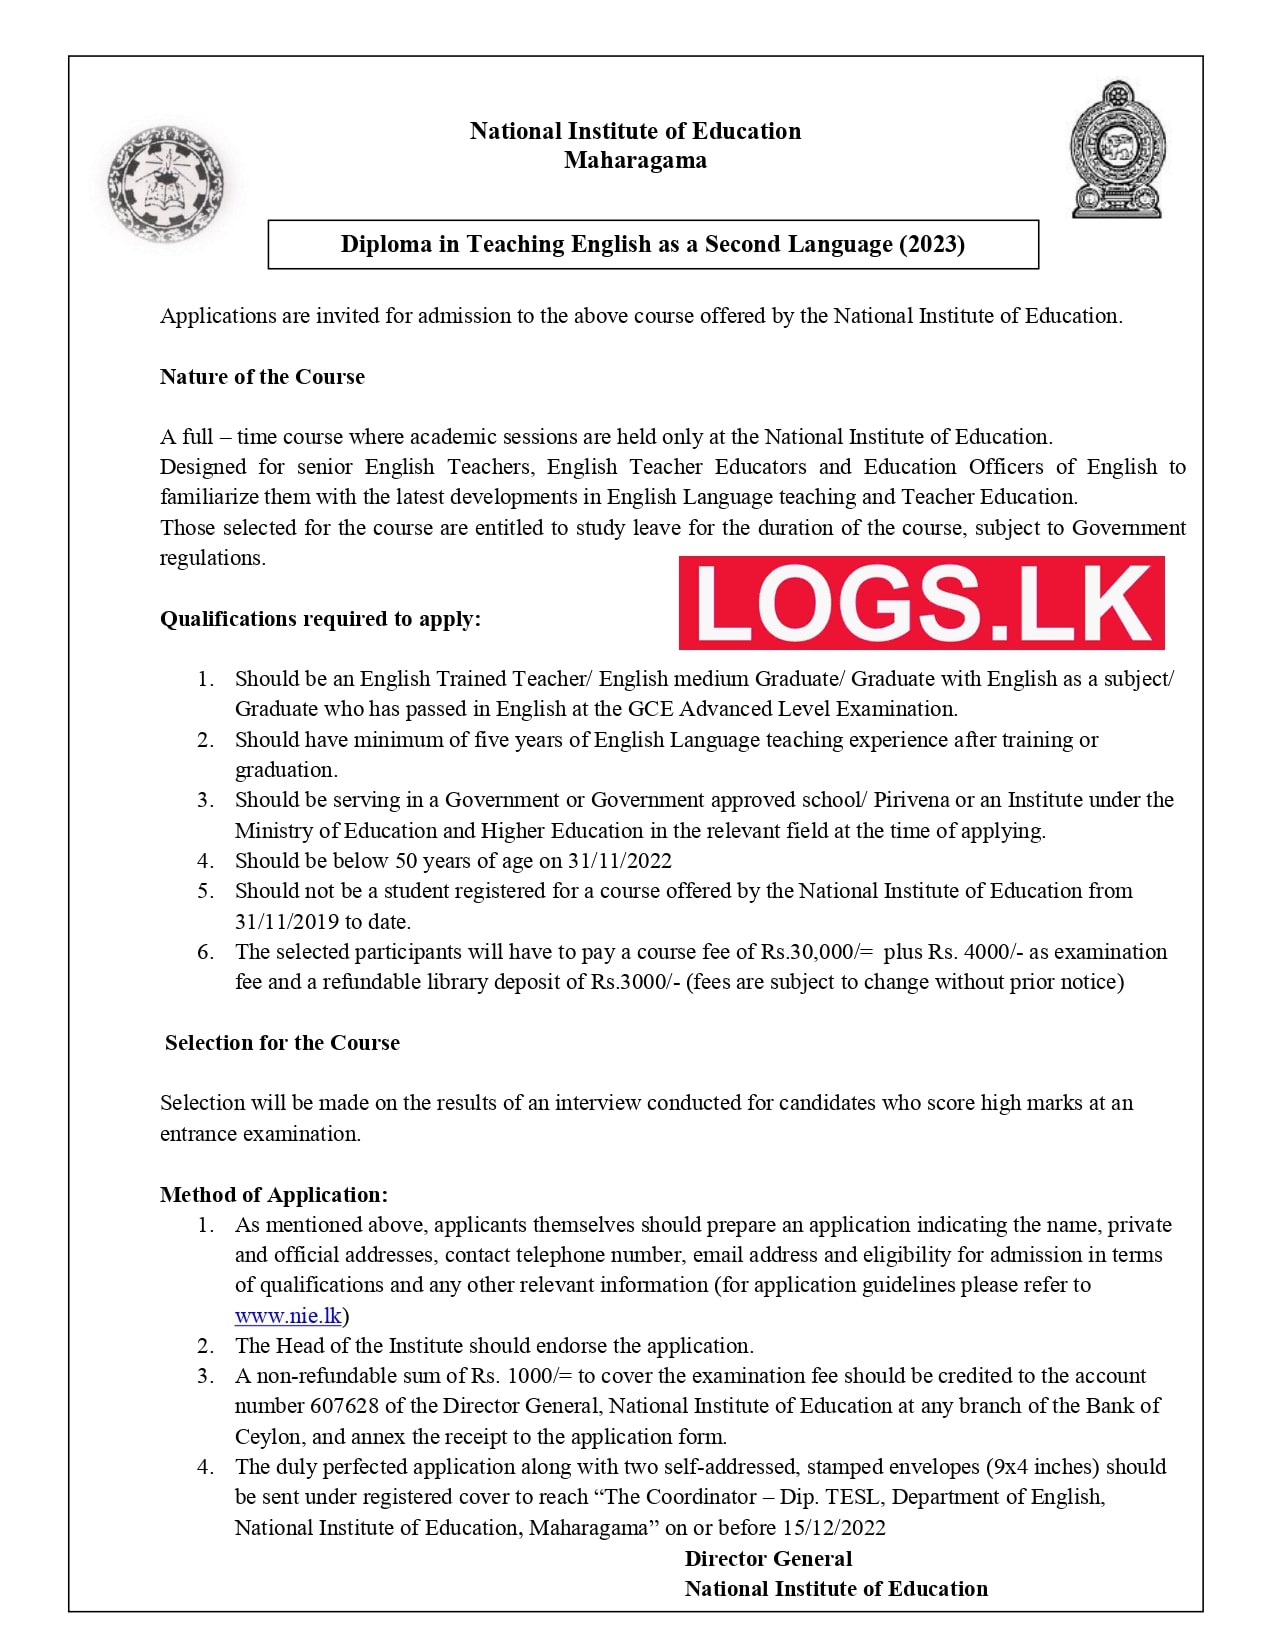 Diploma in Teaching English as a Second Language 2023 Details, Application Form Download